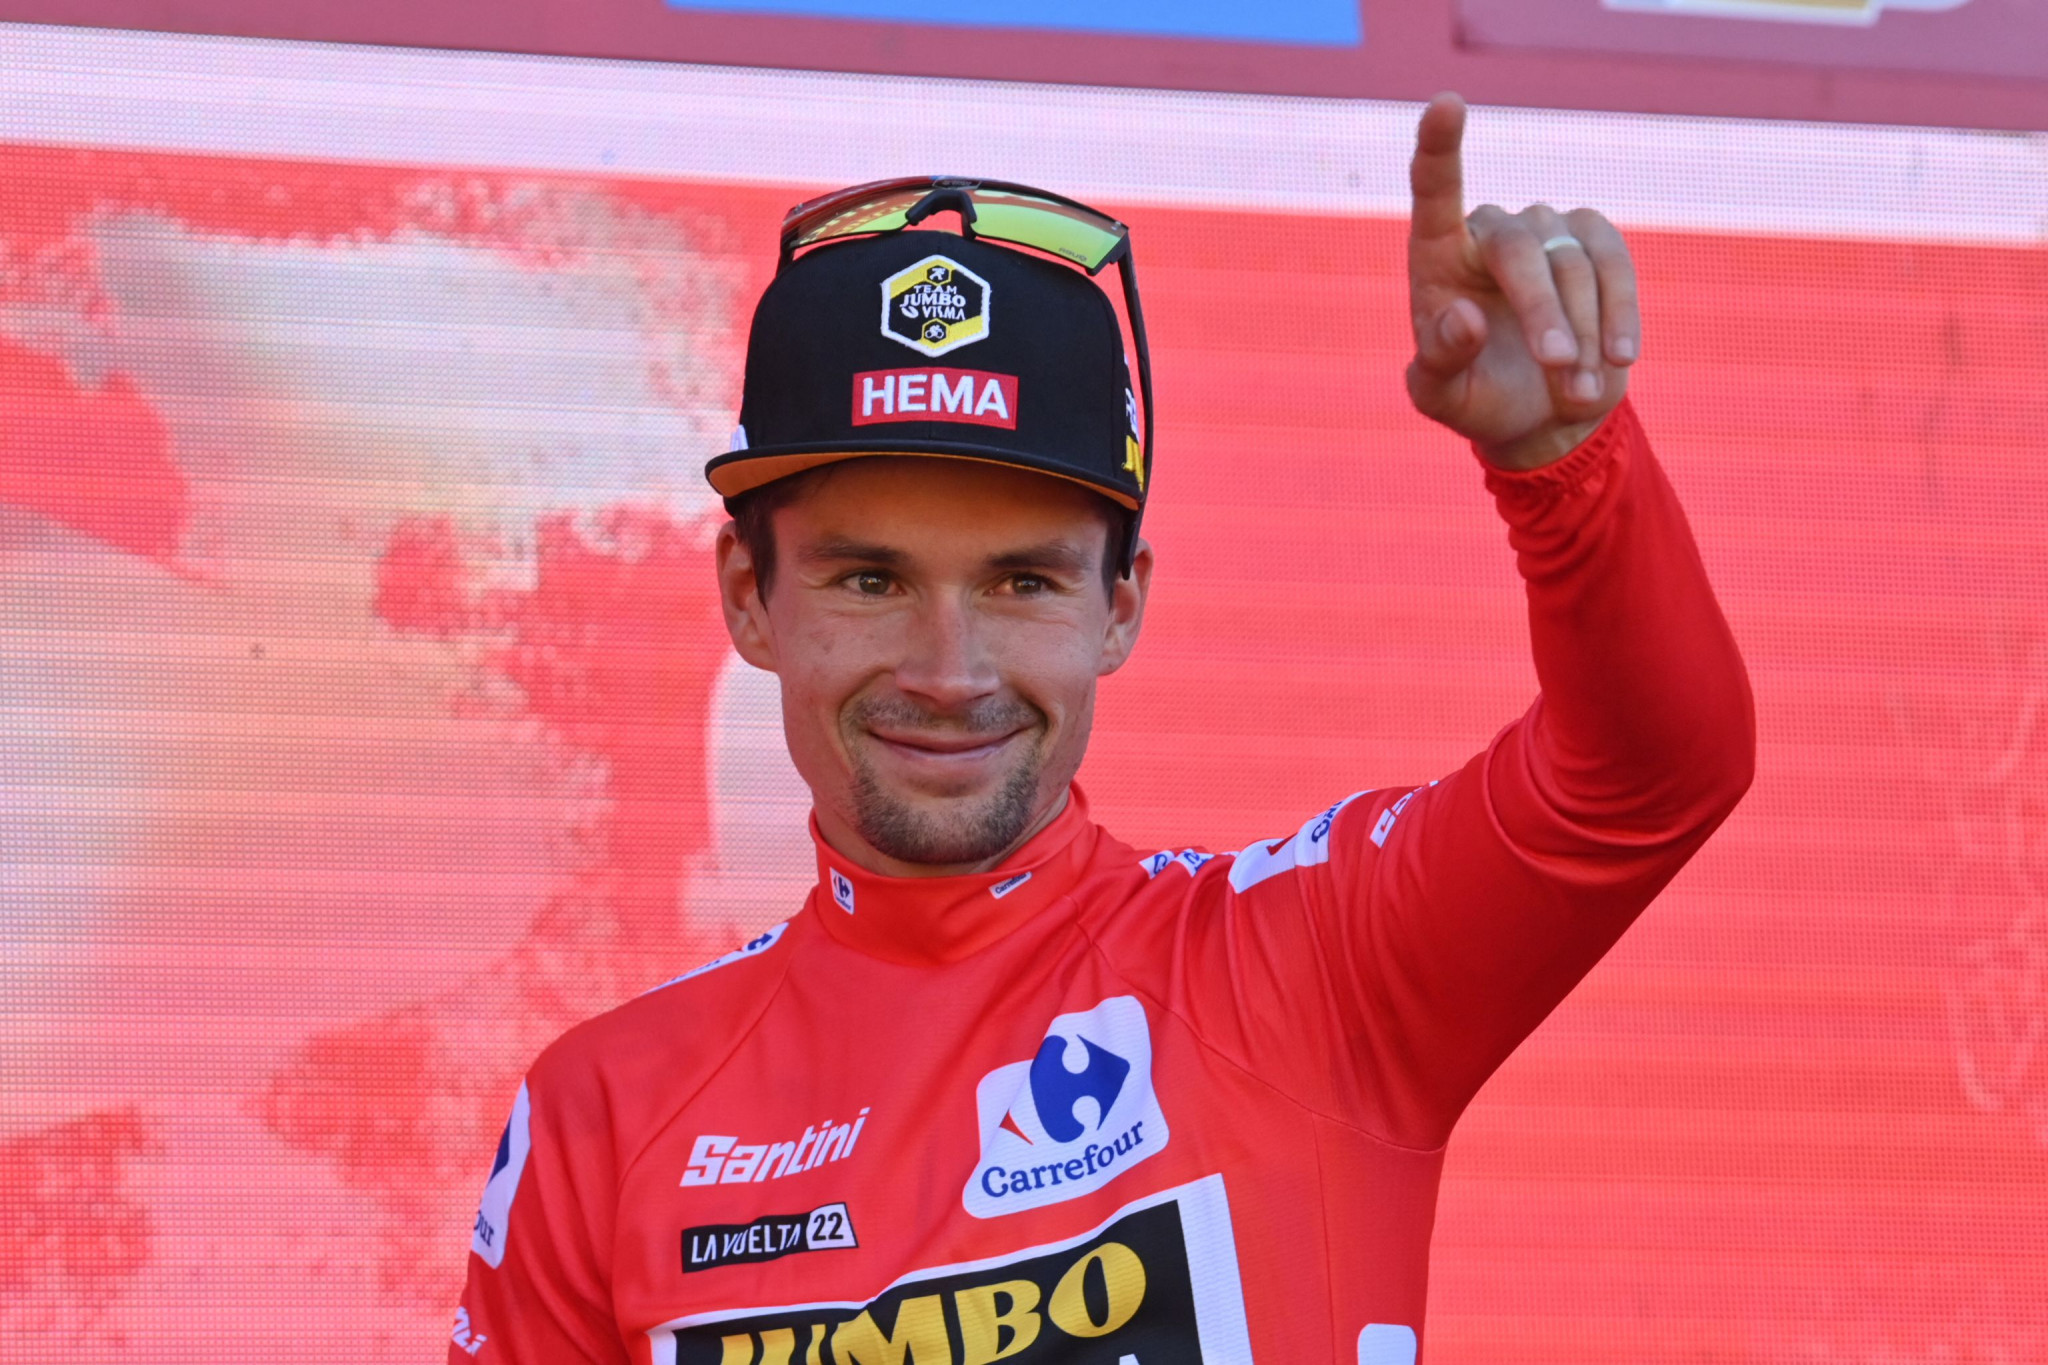 Roglič takes overall lead of Vuelta a España with impressive sprint on stage four